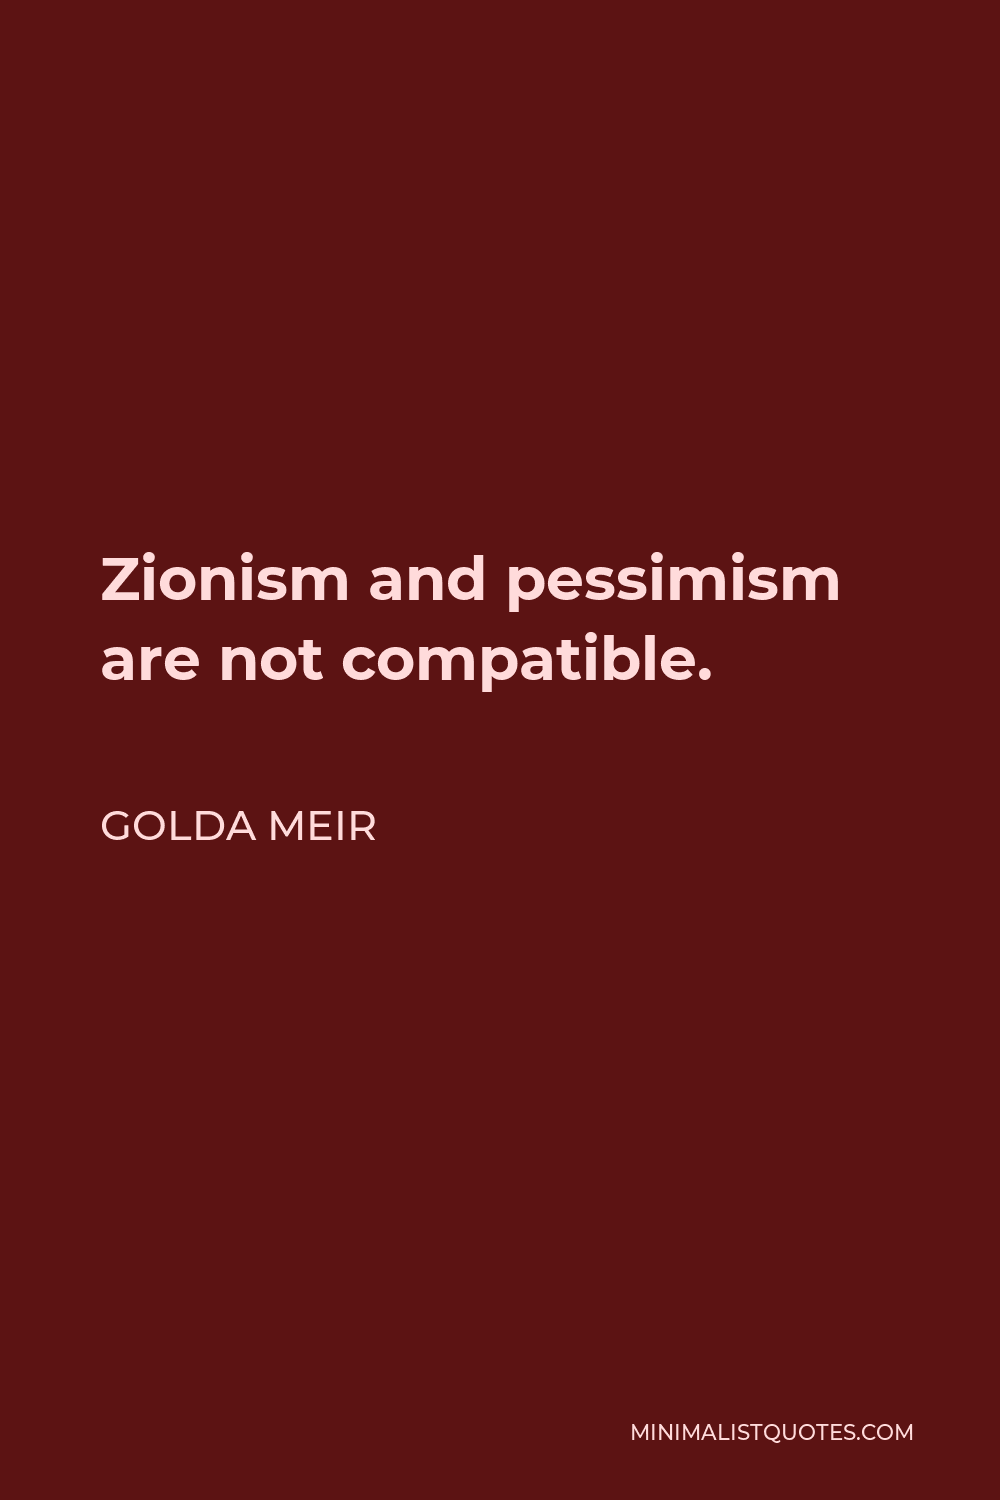 Golda Meir Quote - Zionism and pessimism are not compatible.